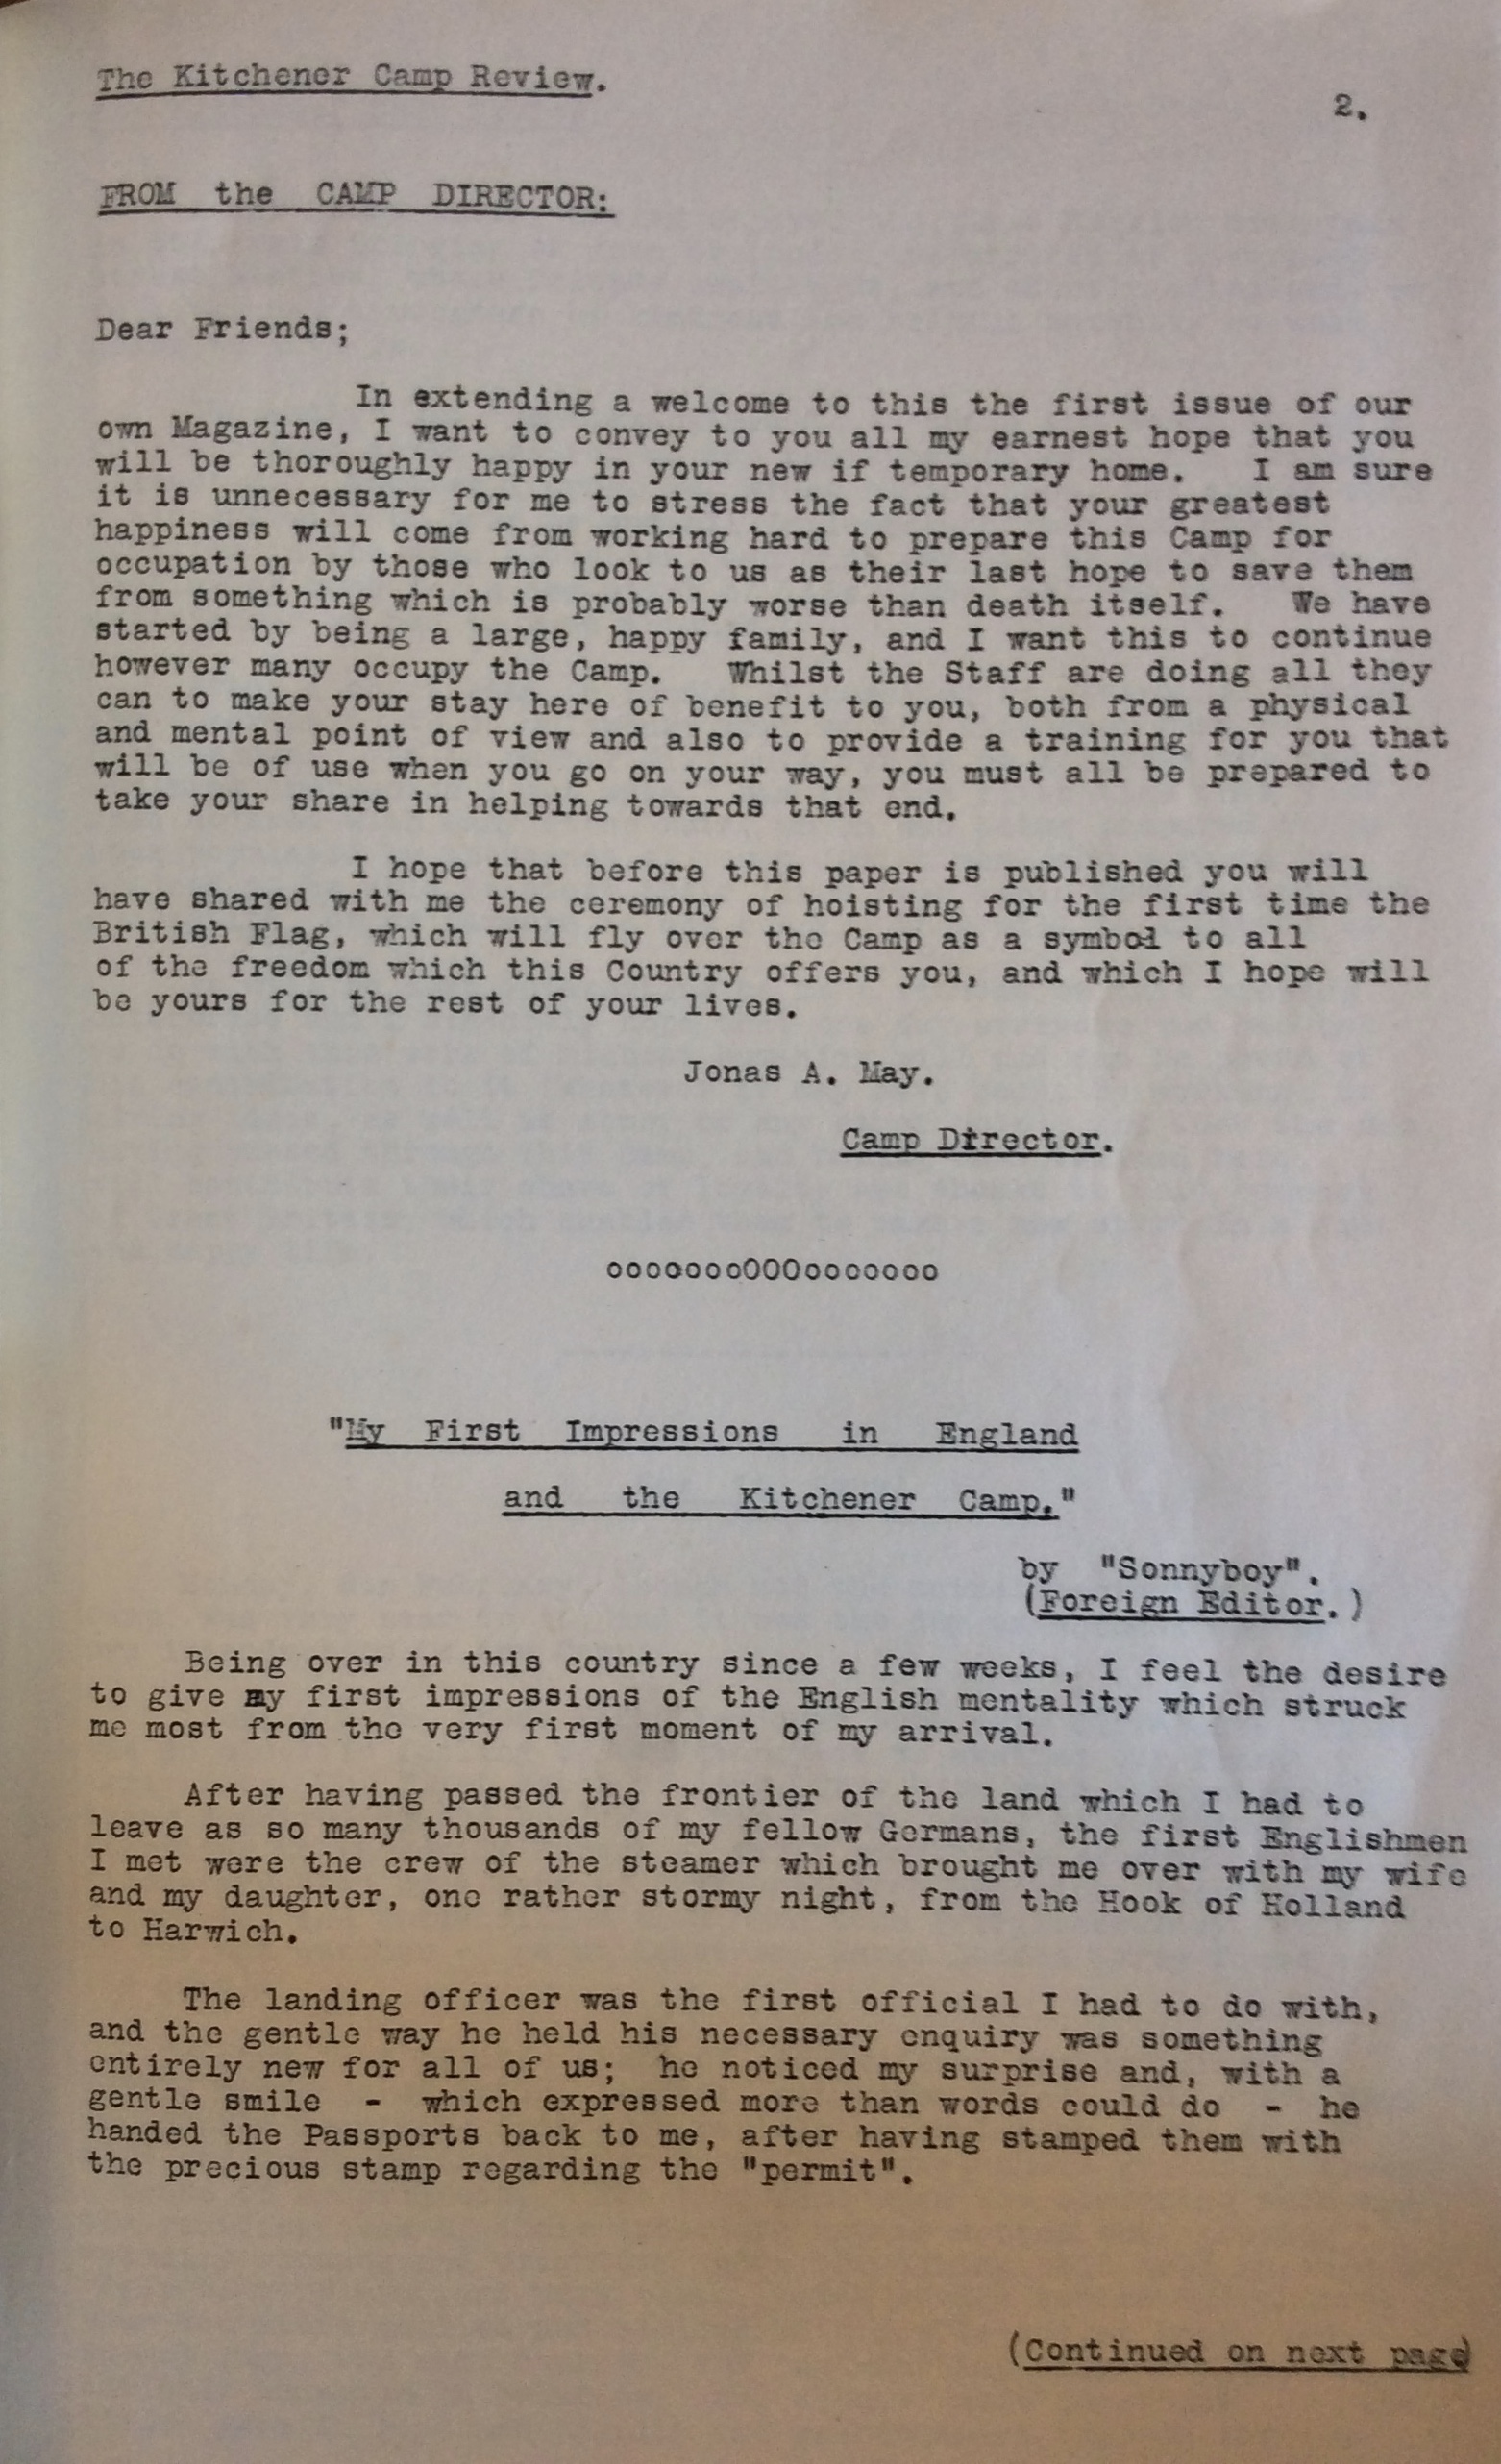 Kitchener Camp Review, No. 1, March 1939, page 2